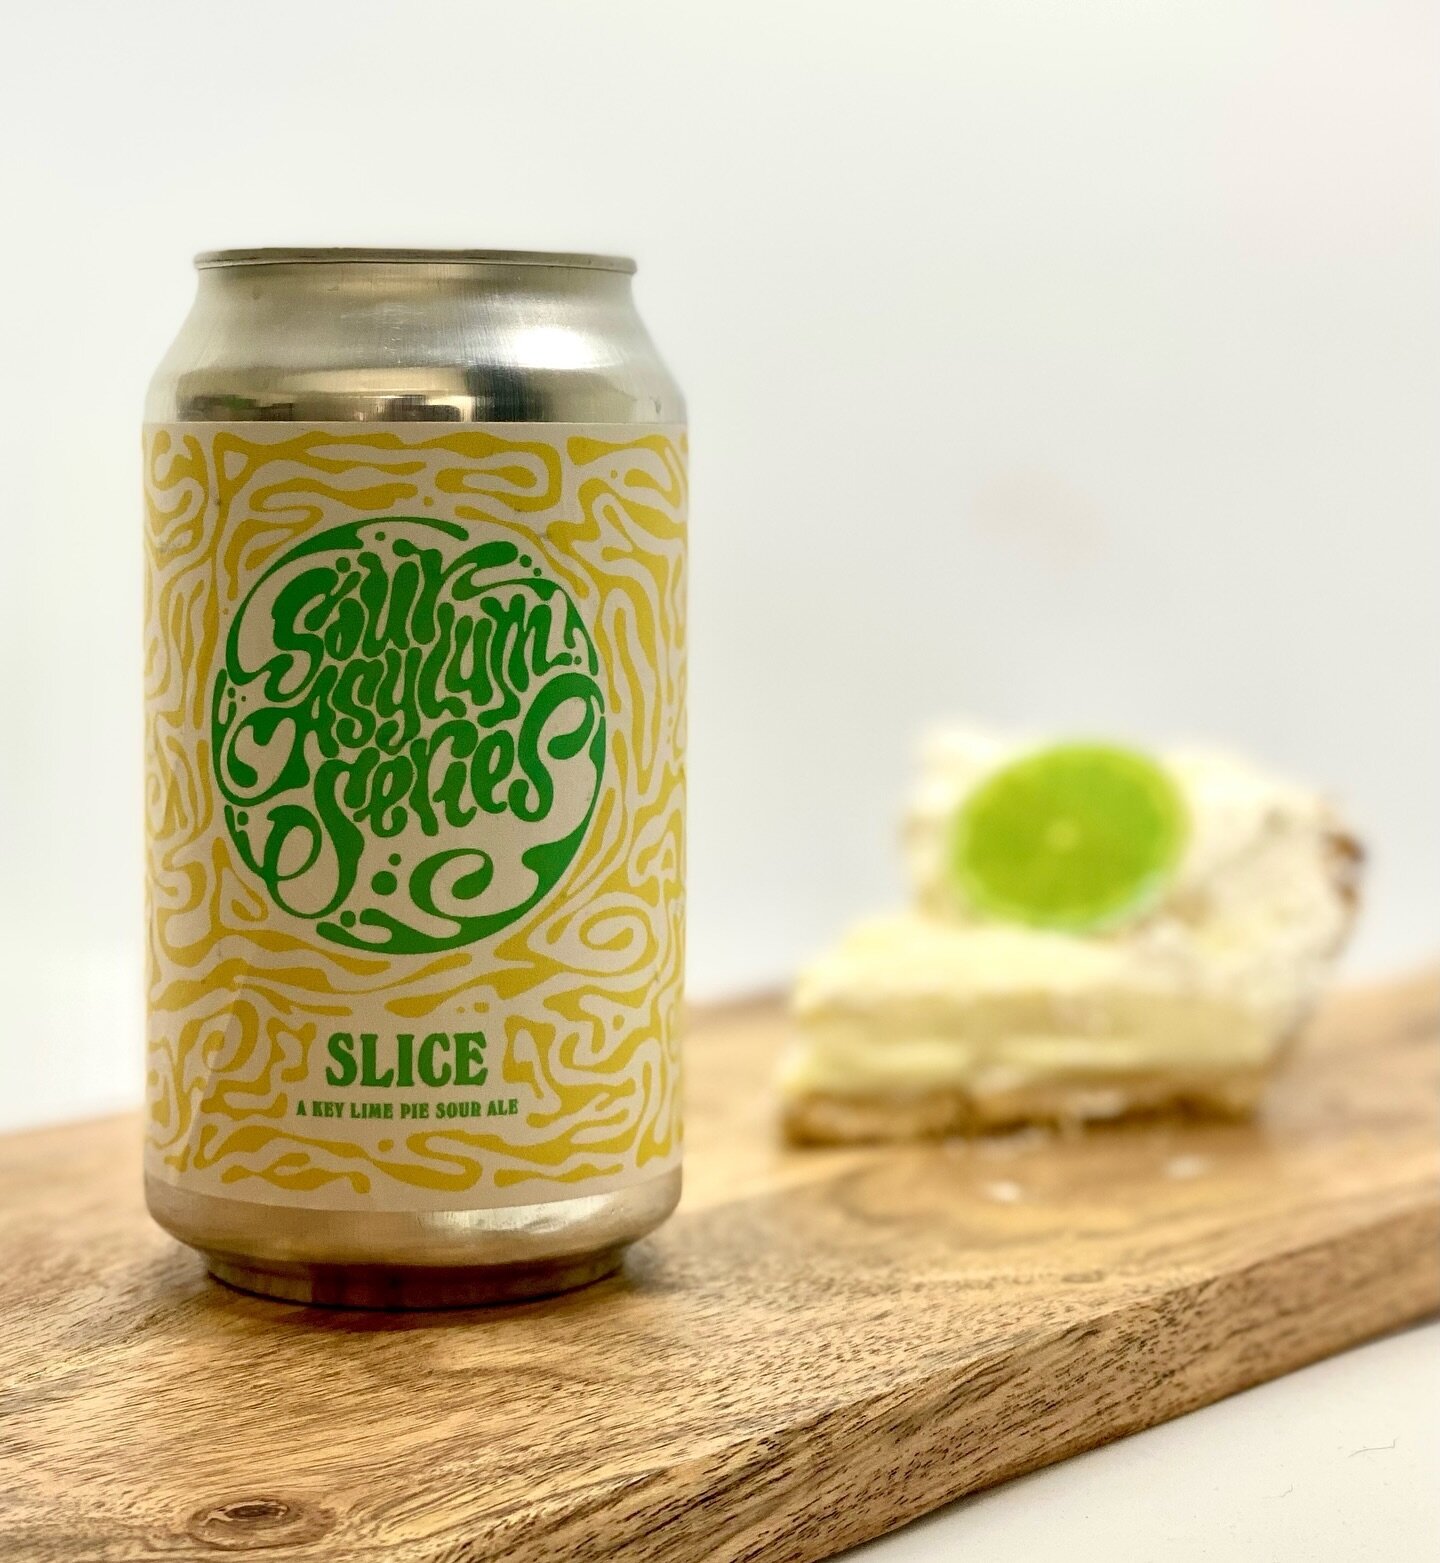 ‼️Slice is Back‼️And just in time for Pi Day.

If you missed out on the GA Beer Day release of our Key Lime Pie sour ale, Slice, don&rsquo;t worry. A fresh new supply of 6-packs is on shelf starting today at both our brewery locations. Come by, have 